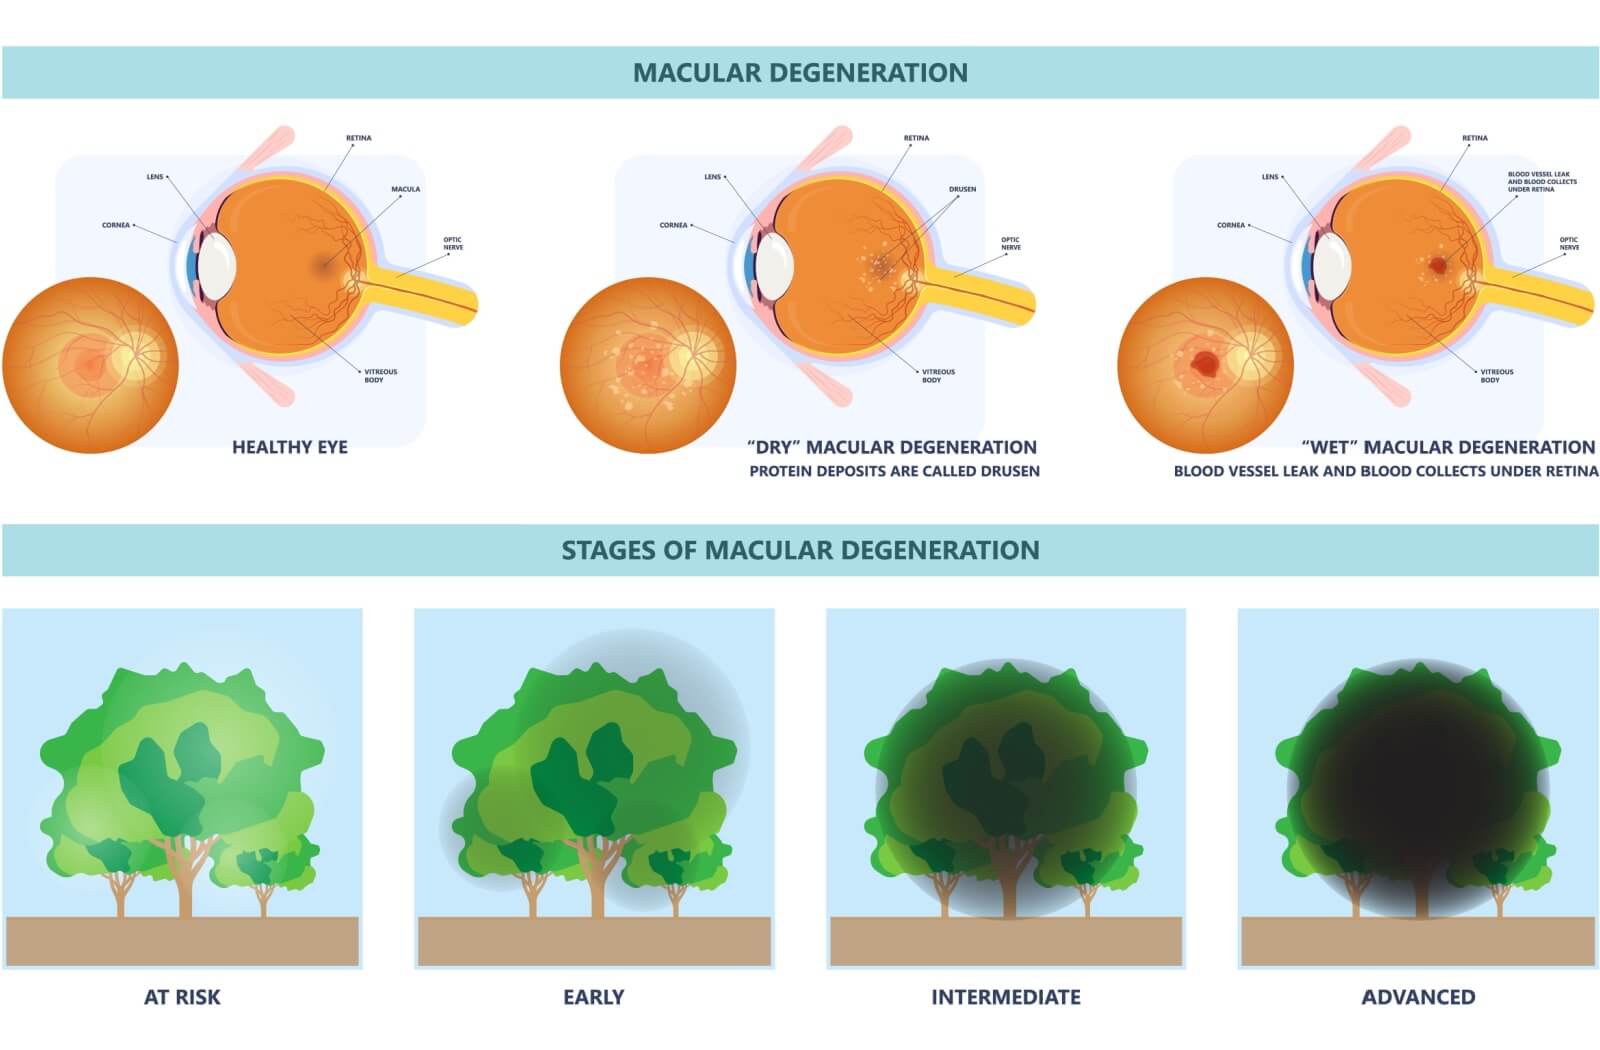 Image depicting the various stages of macular degeneration.